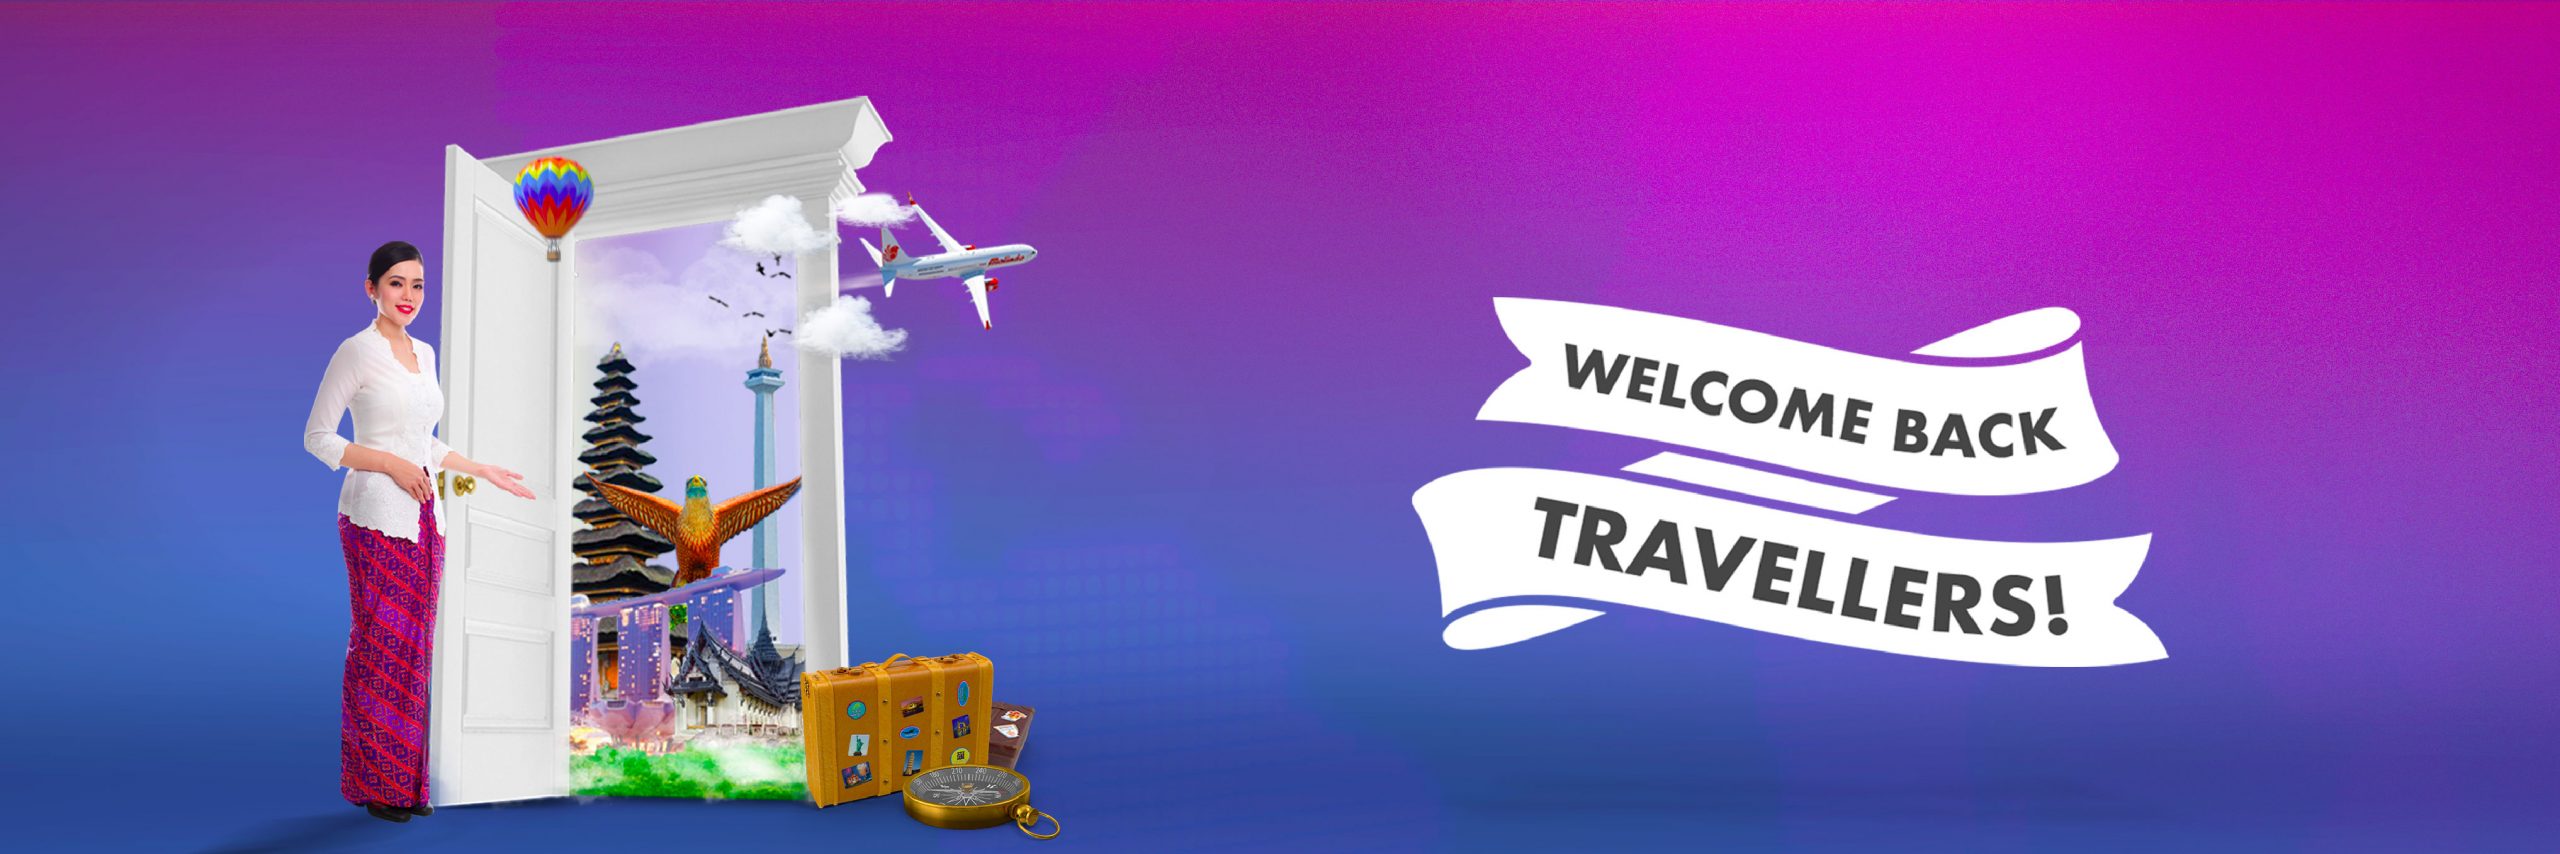 Malindo Air - Welcome Back Travellers! od welcome back travellers scaled